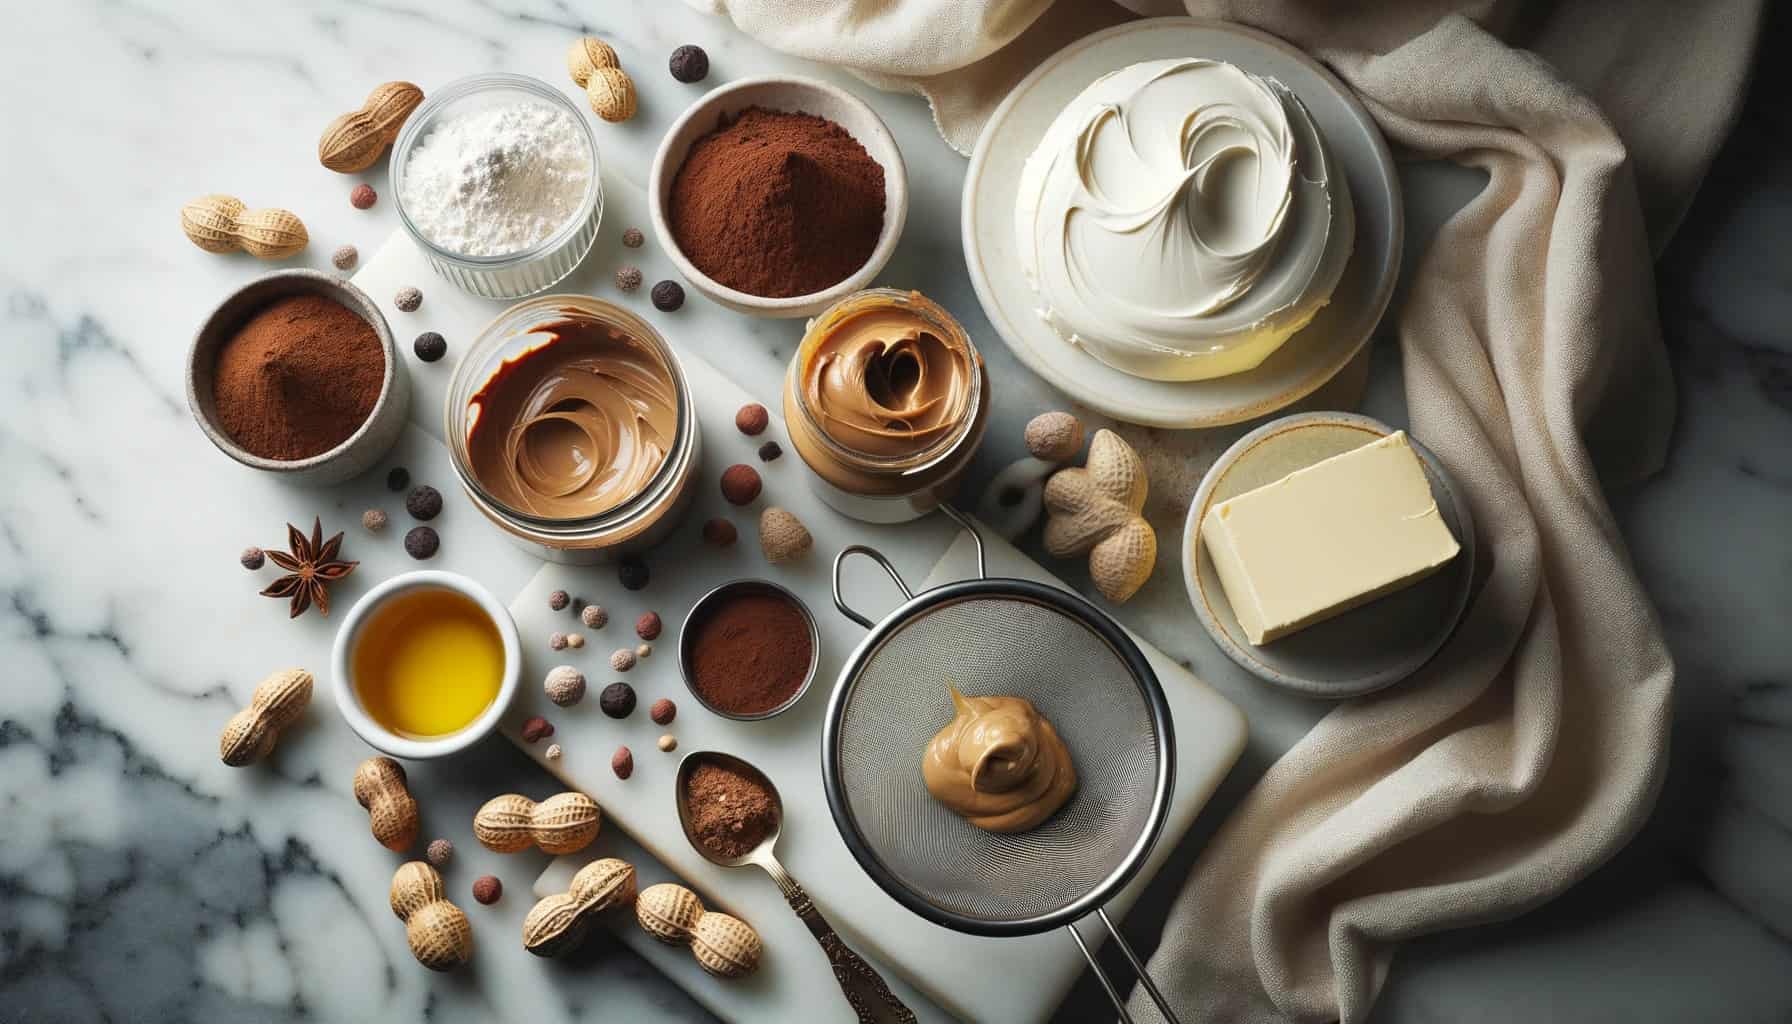 A photo-quality image of a marble kitchen counter adorned with the ingredients for a sweet treat. There's a tub of cream cheese, a jar of peanut butter, a sieve with cocoa powder, a container of melted butter, and a spoon drizzled with maple syrup.